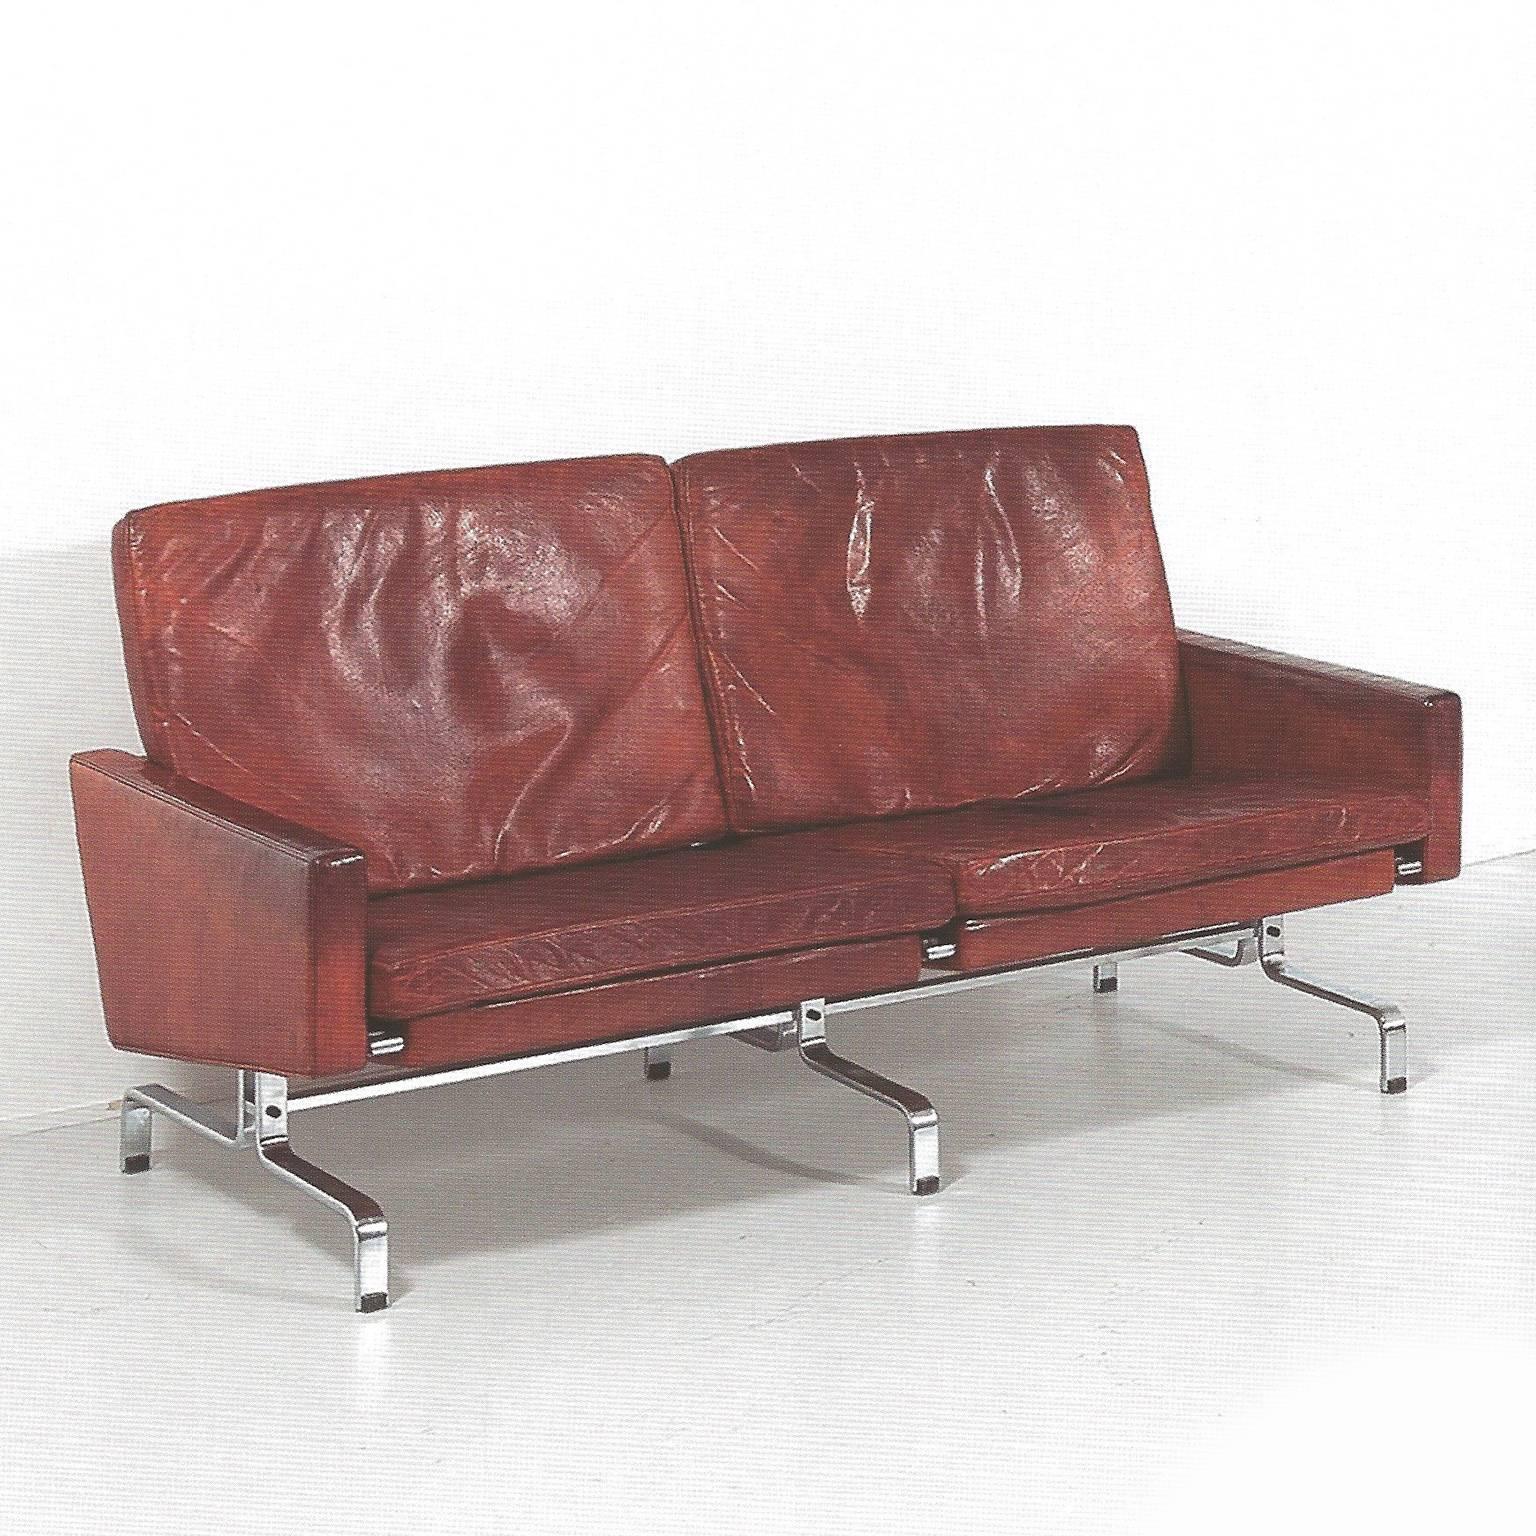 Pair of two-seat leather sofas, model PK31/2.
Nickel-plated steel structure, original vegetal leather seats.
Edition Kold Christensen.